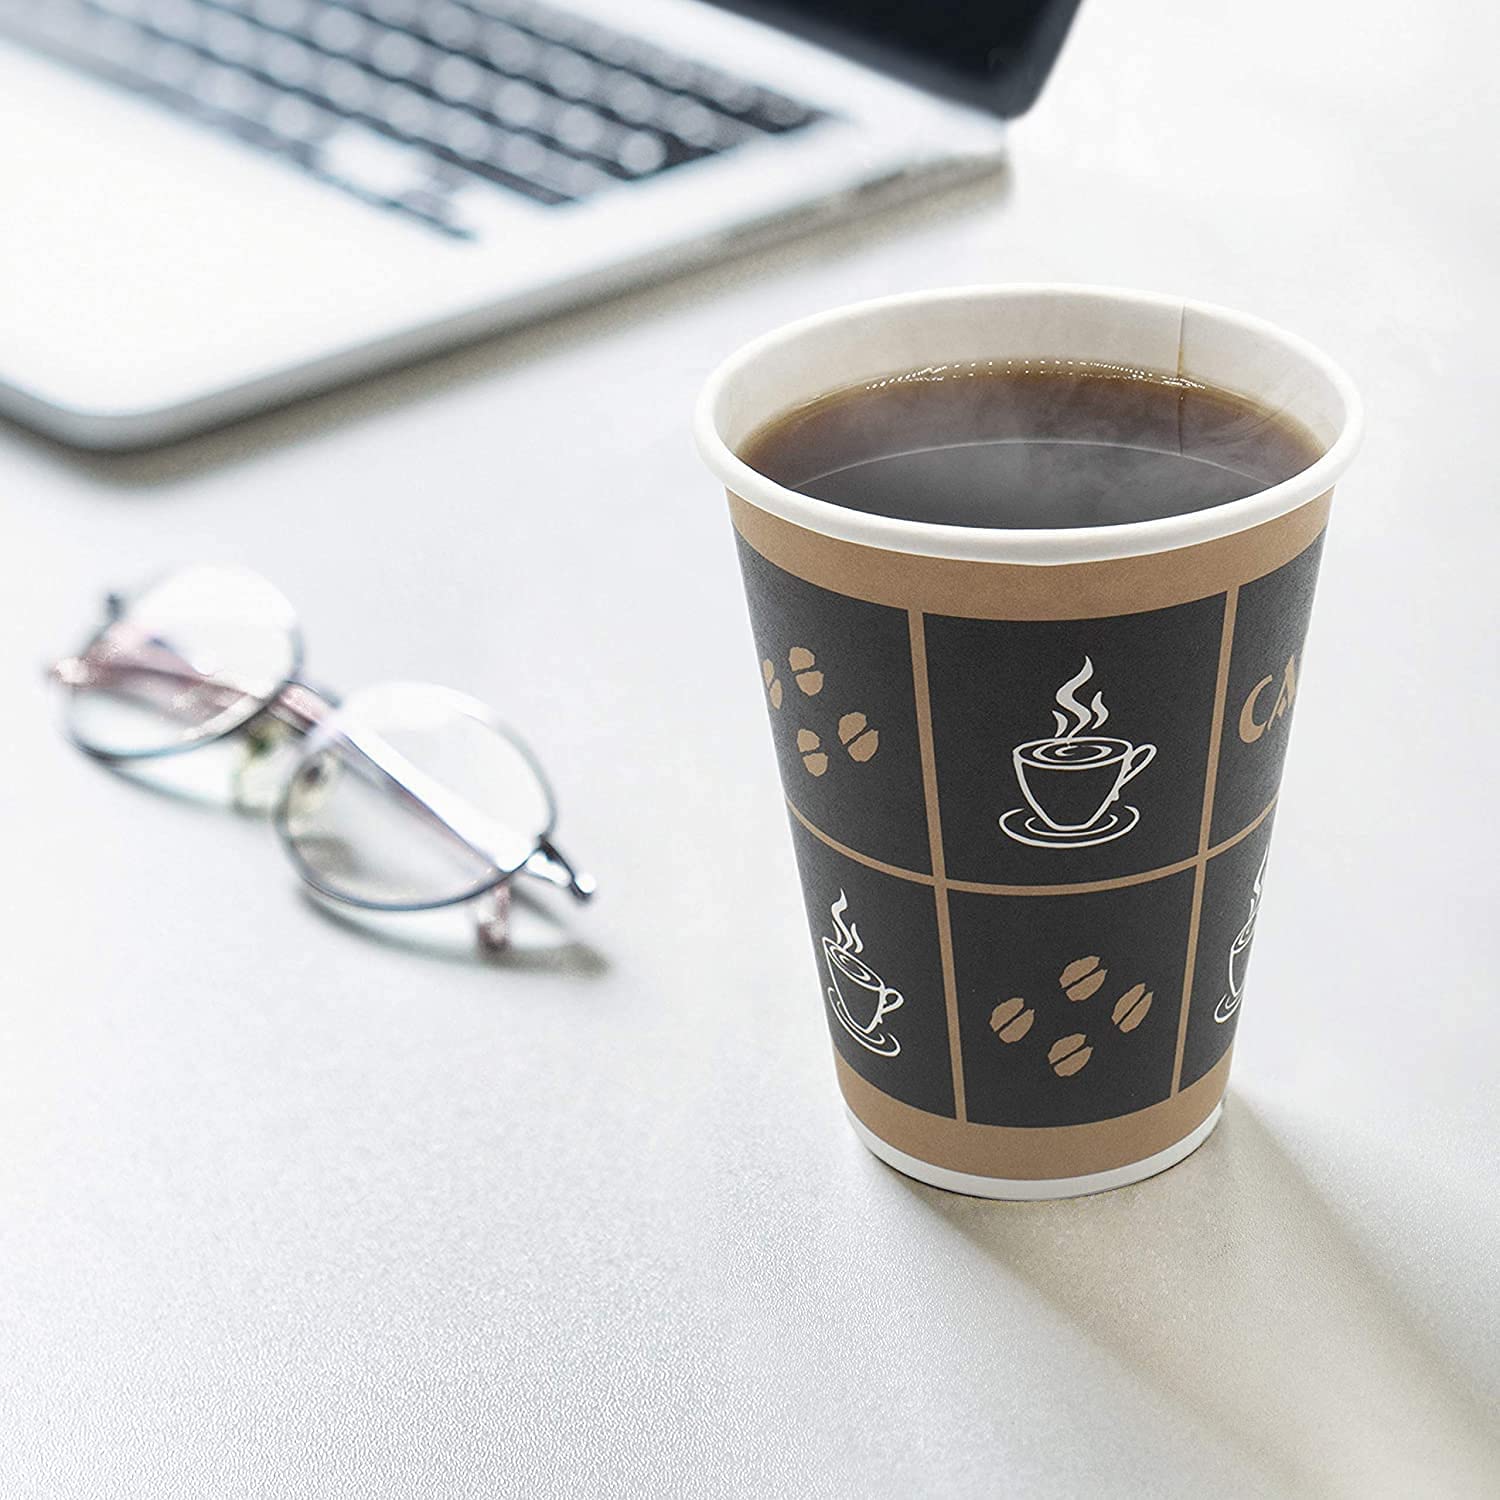 https://www.tuobopackaging.com/custom-printed-paper-coffee-cups-free-sample-tuobo-product/